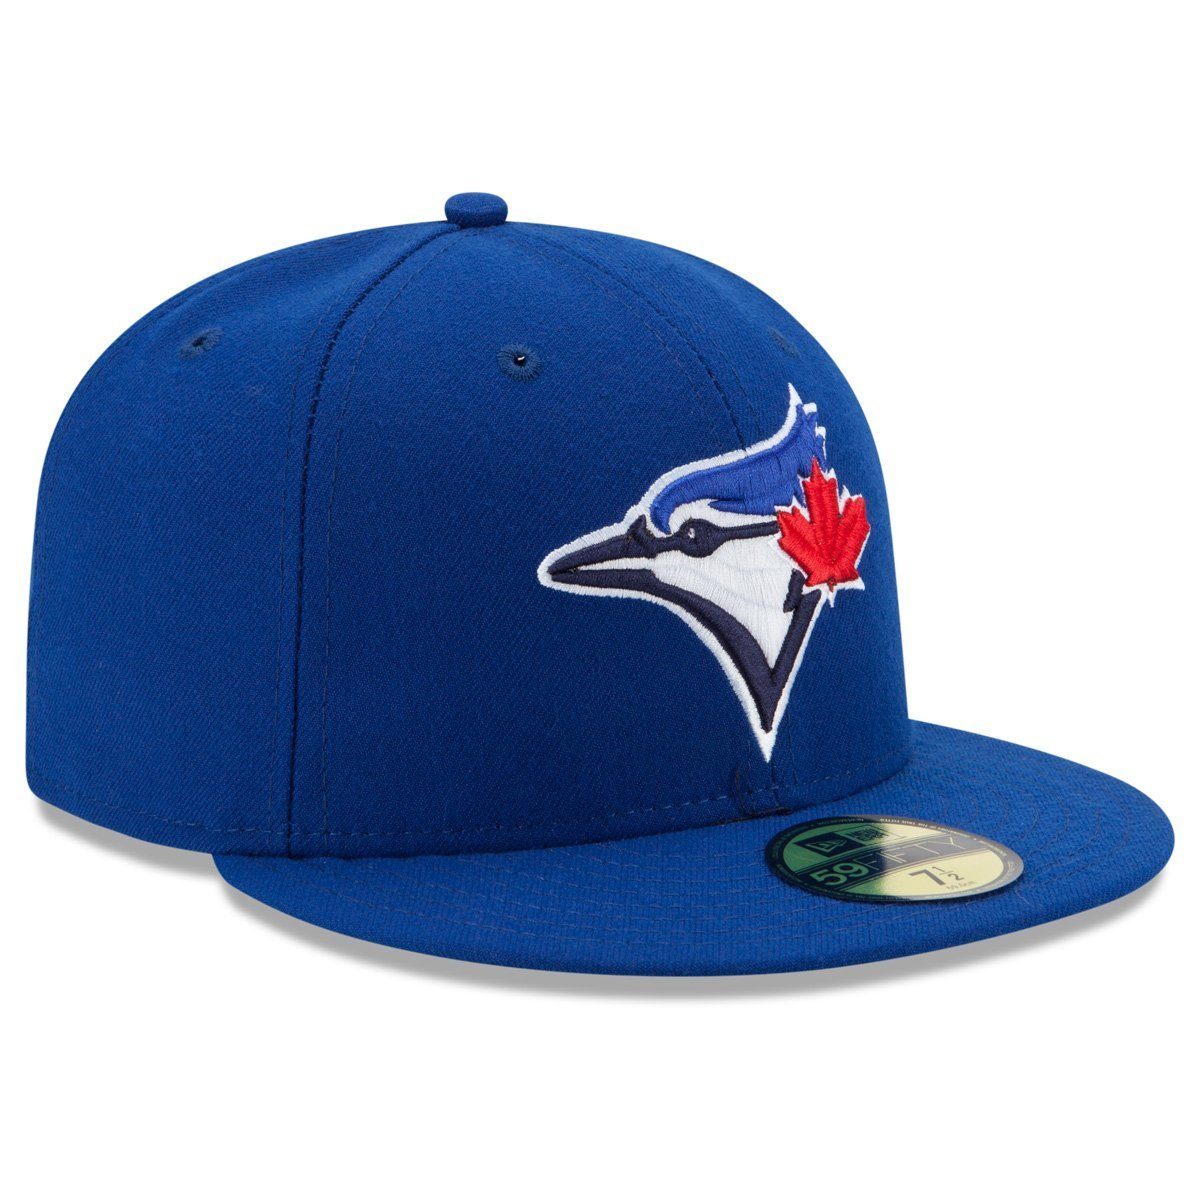 New Fitted Cap Jays Era ONFIELD Toronto 59Fifty AUTHENTIC